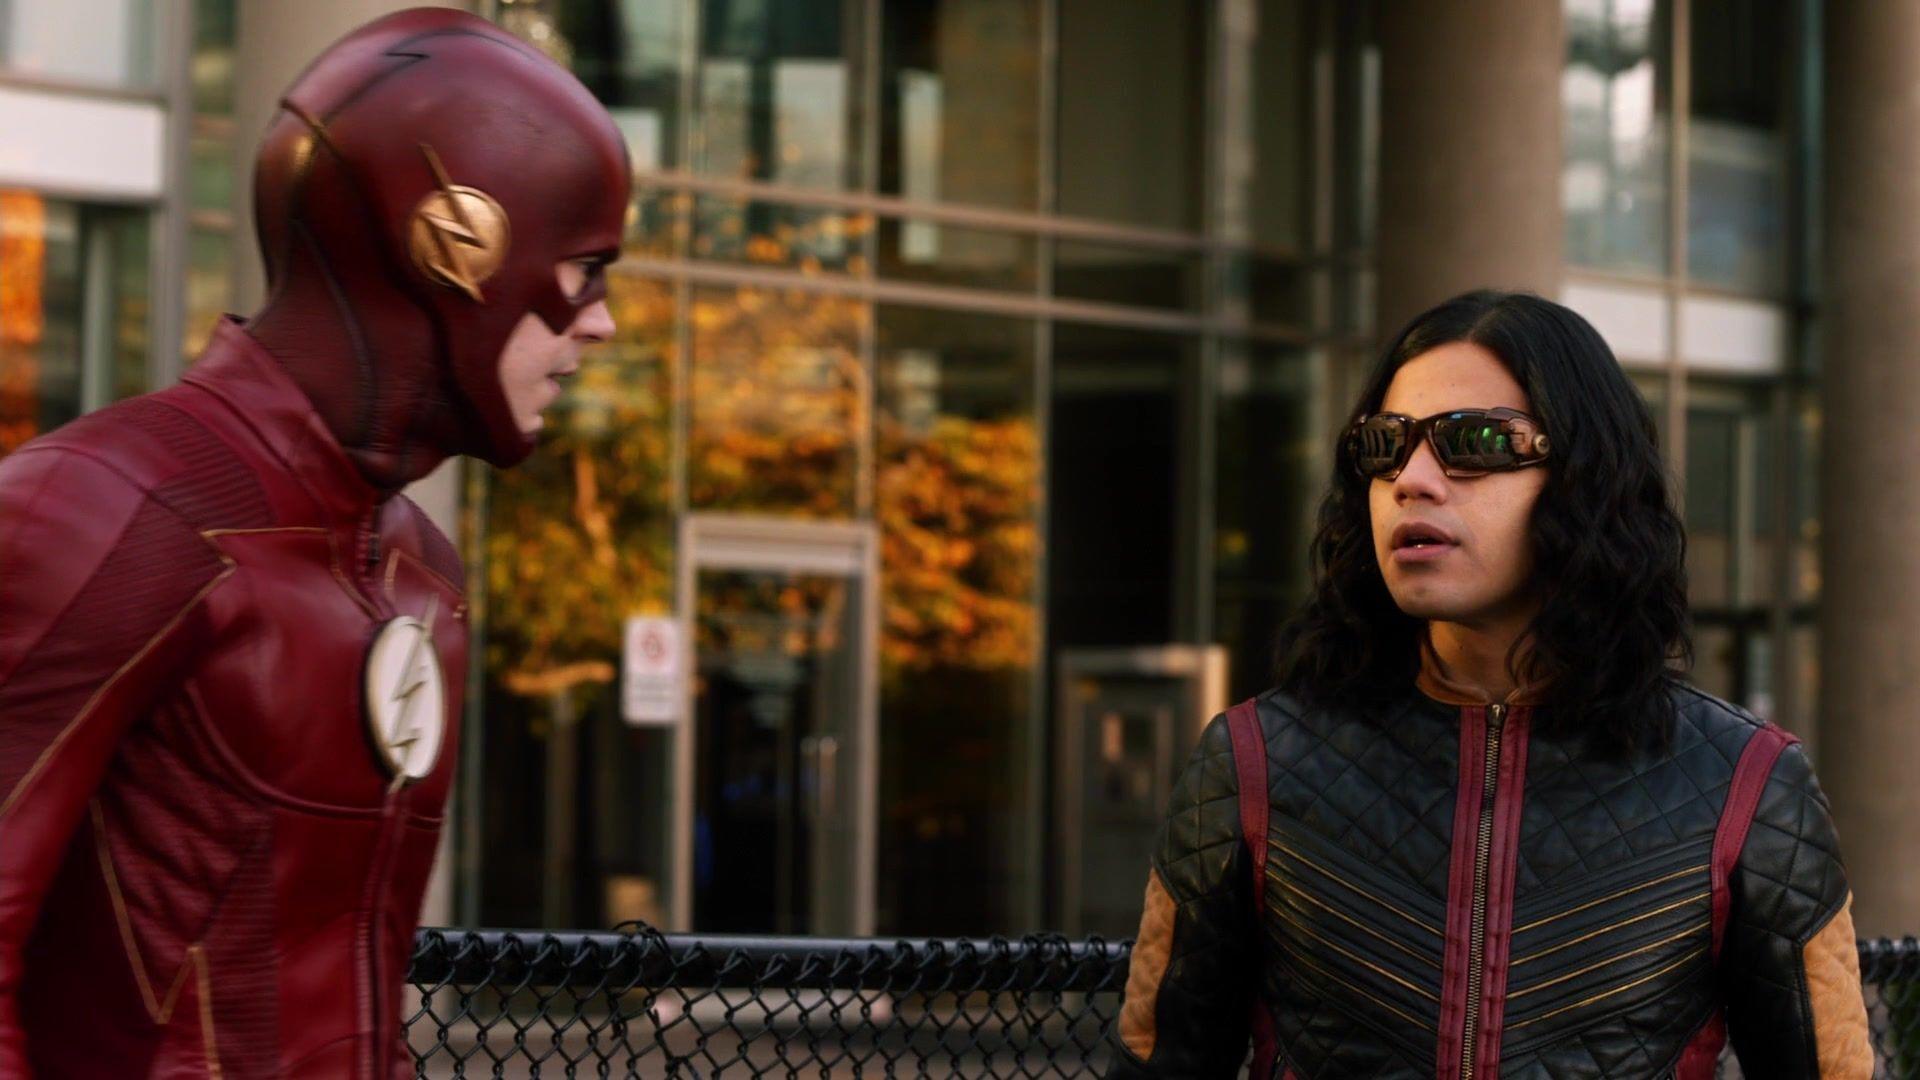 Carlos Valdes, Cisco Vibe On CW's The Flash, Possibly Getting A 'Soft Exit' From The Series, Could Return In The Future